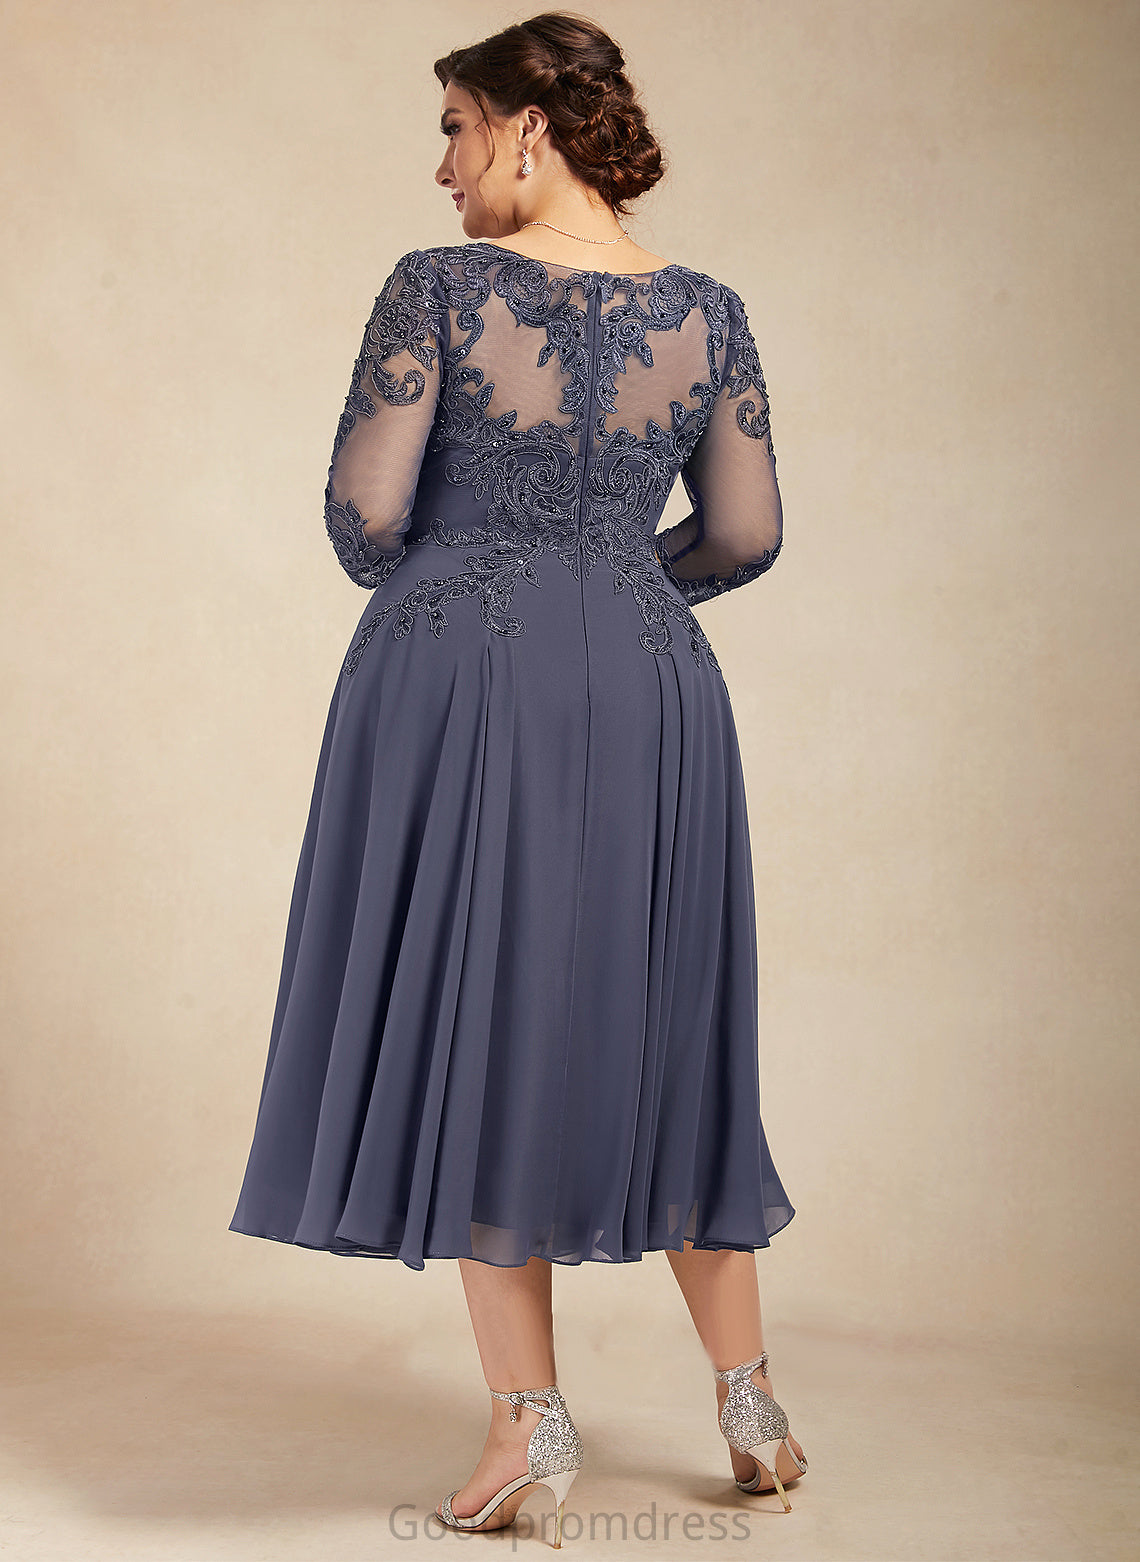 Lace Neck Dresses Chiffon Formal Dresses A-line Isis Round